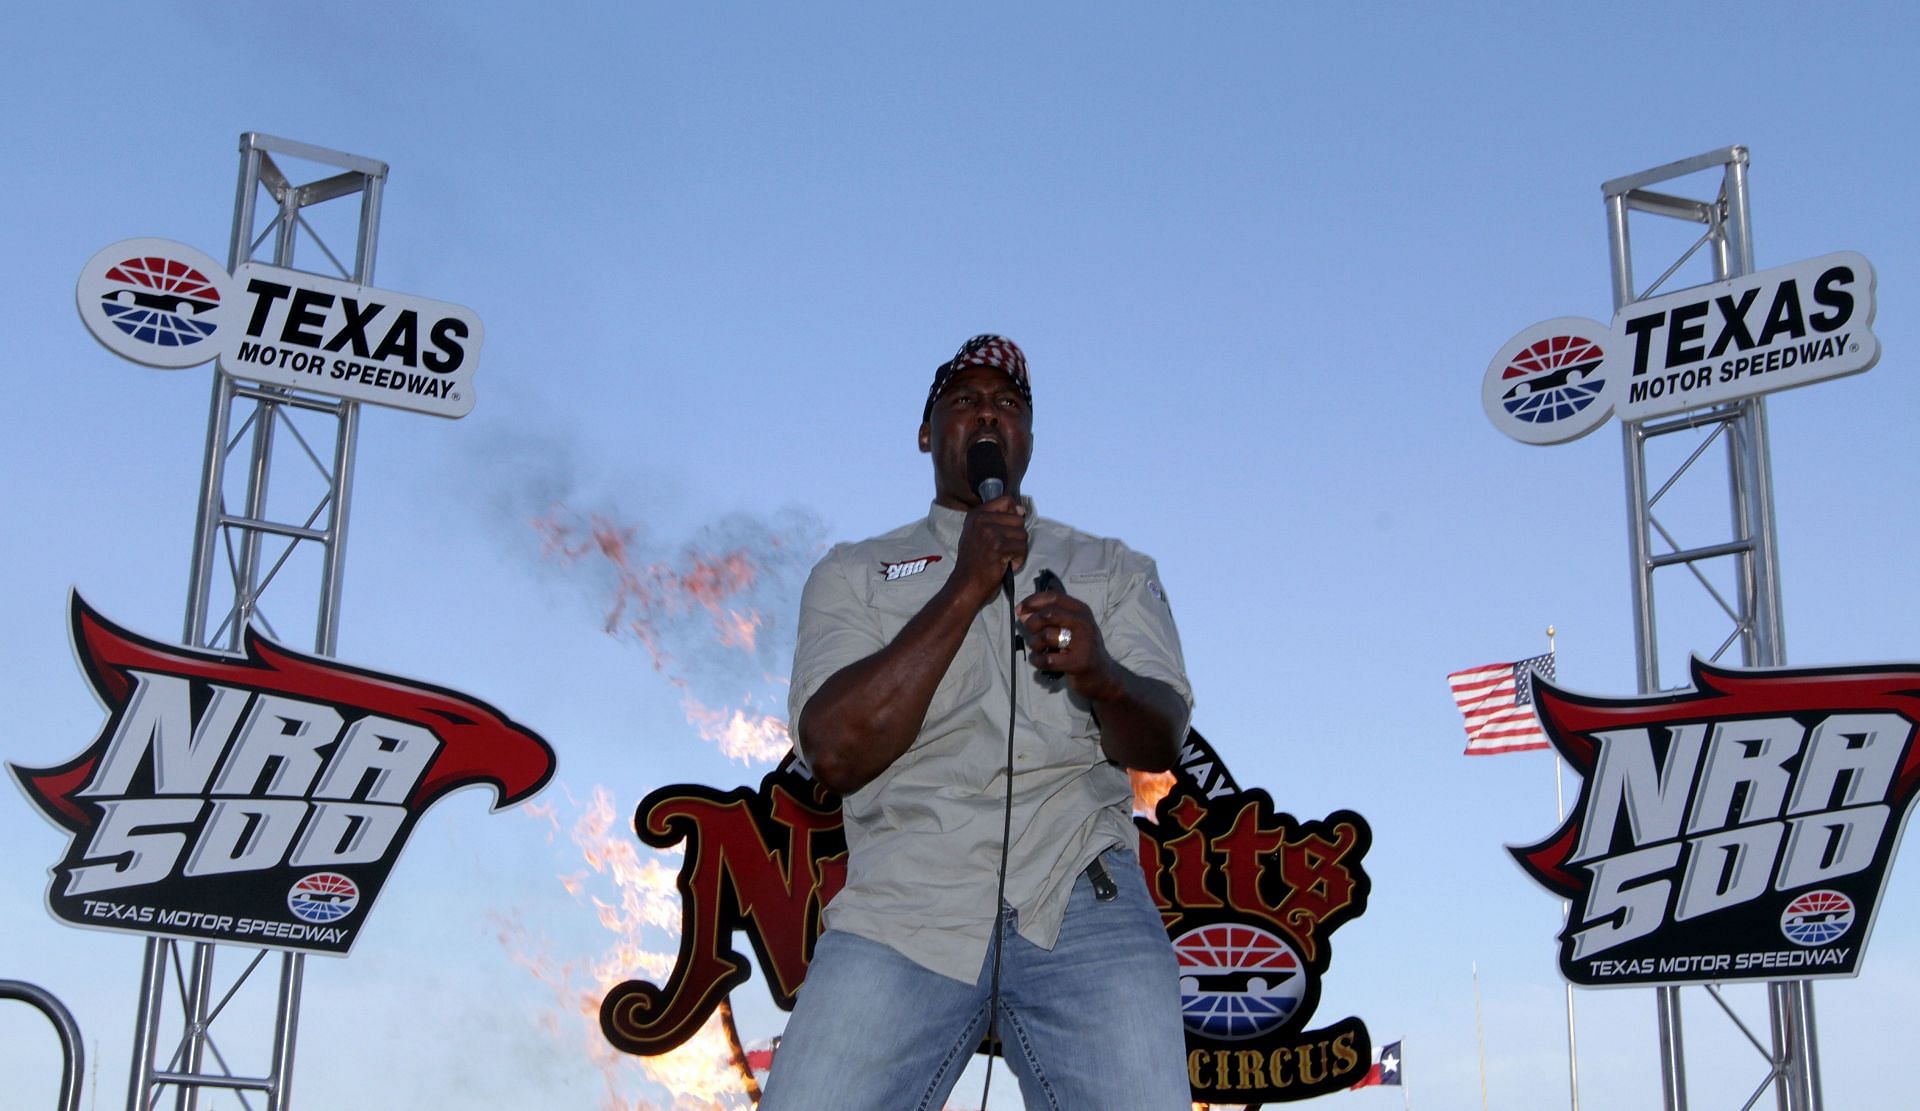 Karl Malone at the NRA 500 racing event